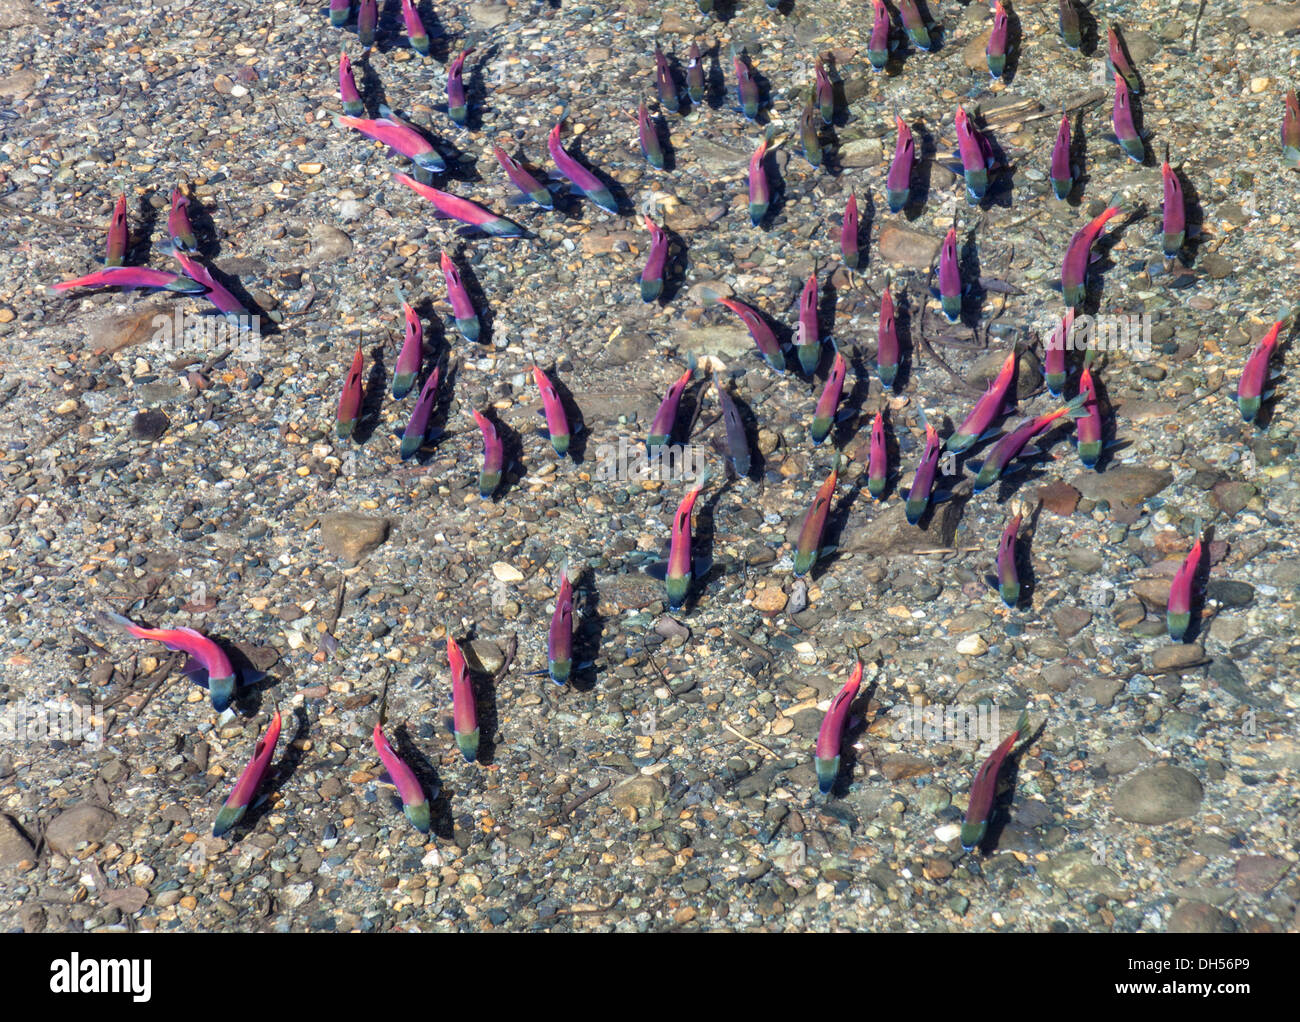 Kokanee salmon in Taylor Creek in South Lake Tahoe in autumn; salmon turn bright pink and red when they spawn in the fall Stock Photo